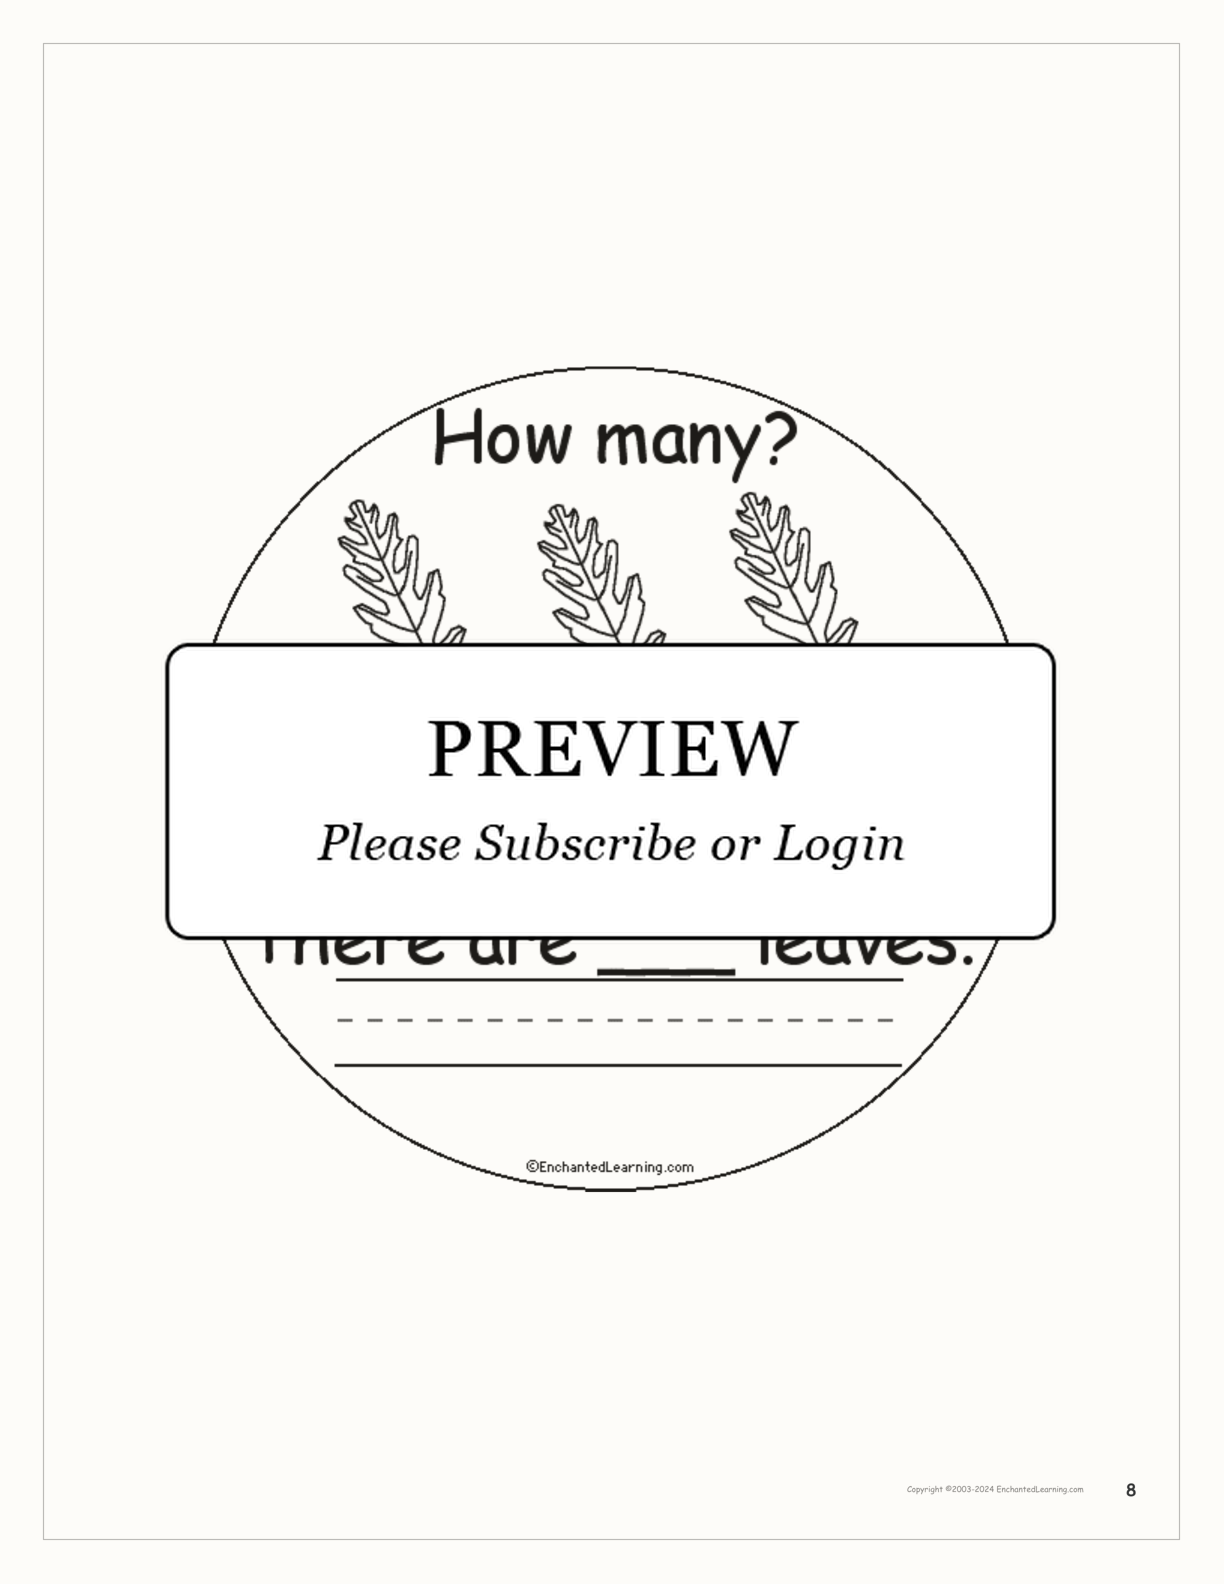 How Many Leaves? interactive printout page 8